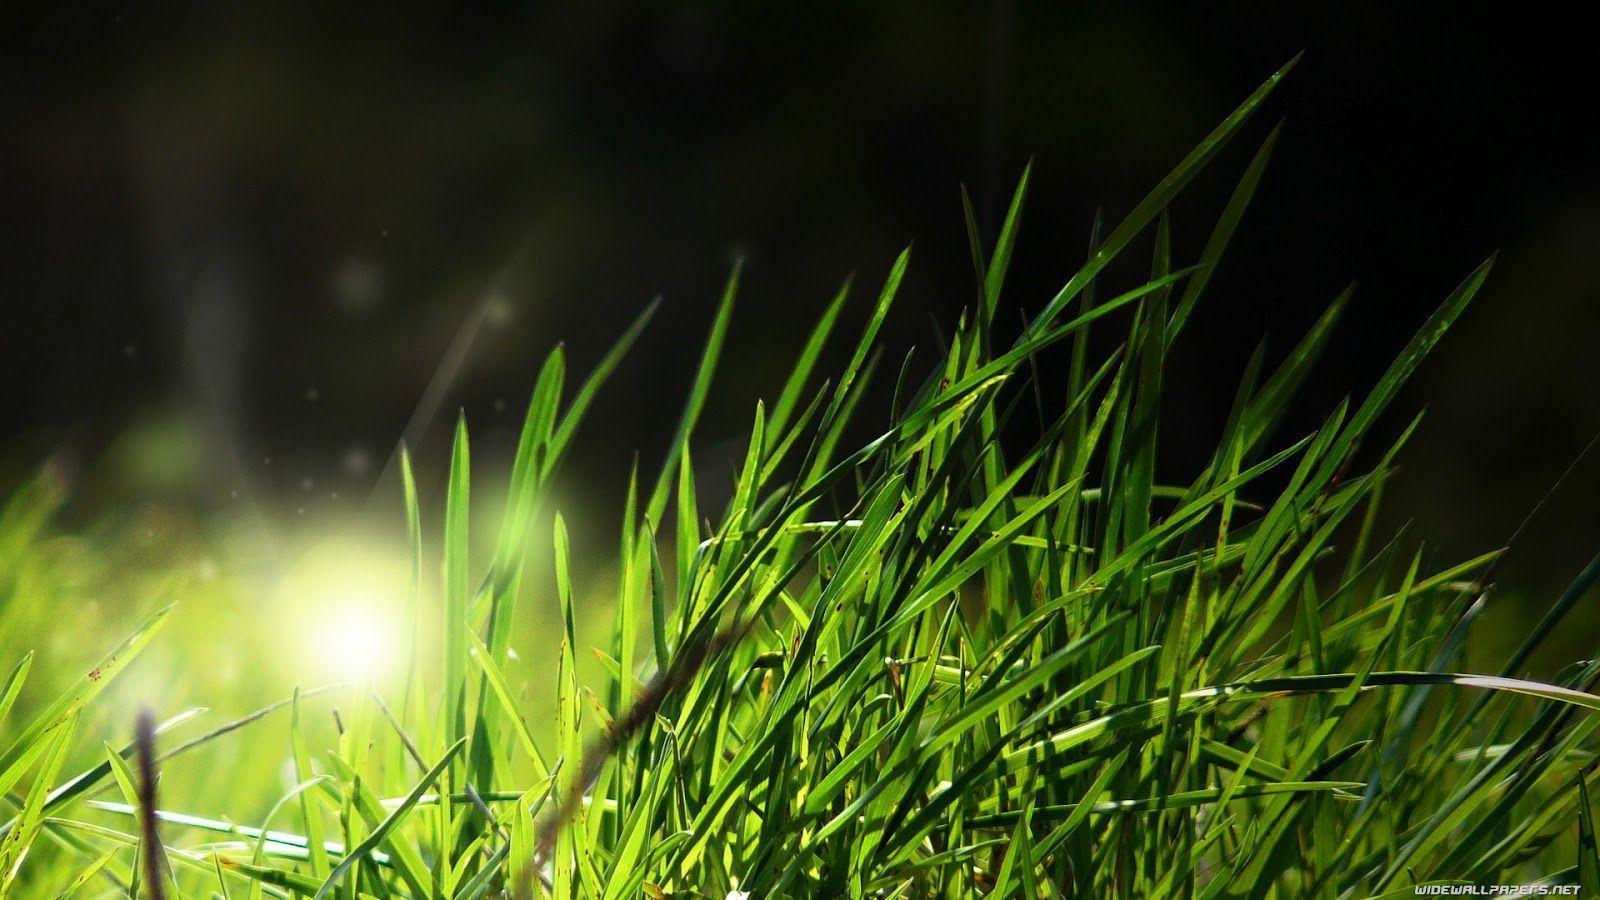 Nature: Grass Full HD Nature Background Wallpaper For Laptop